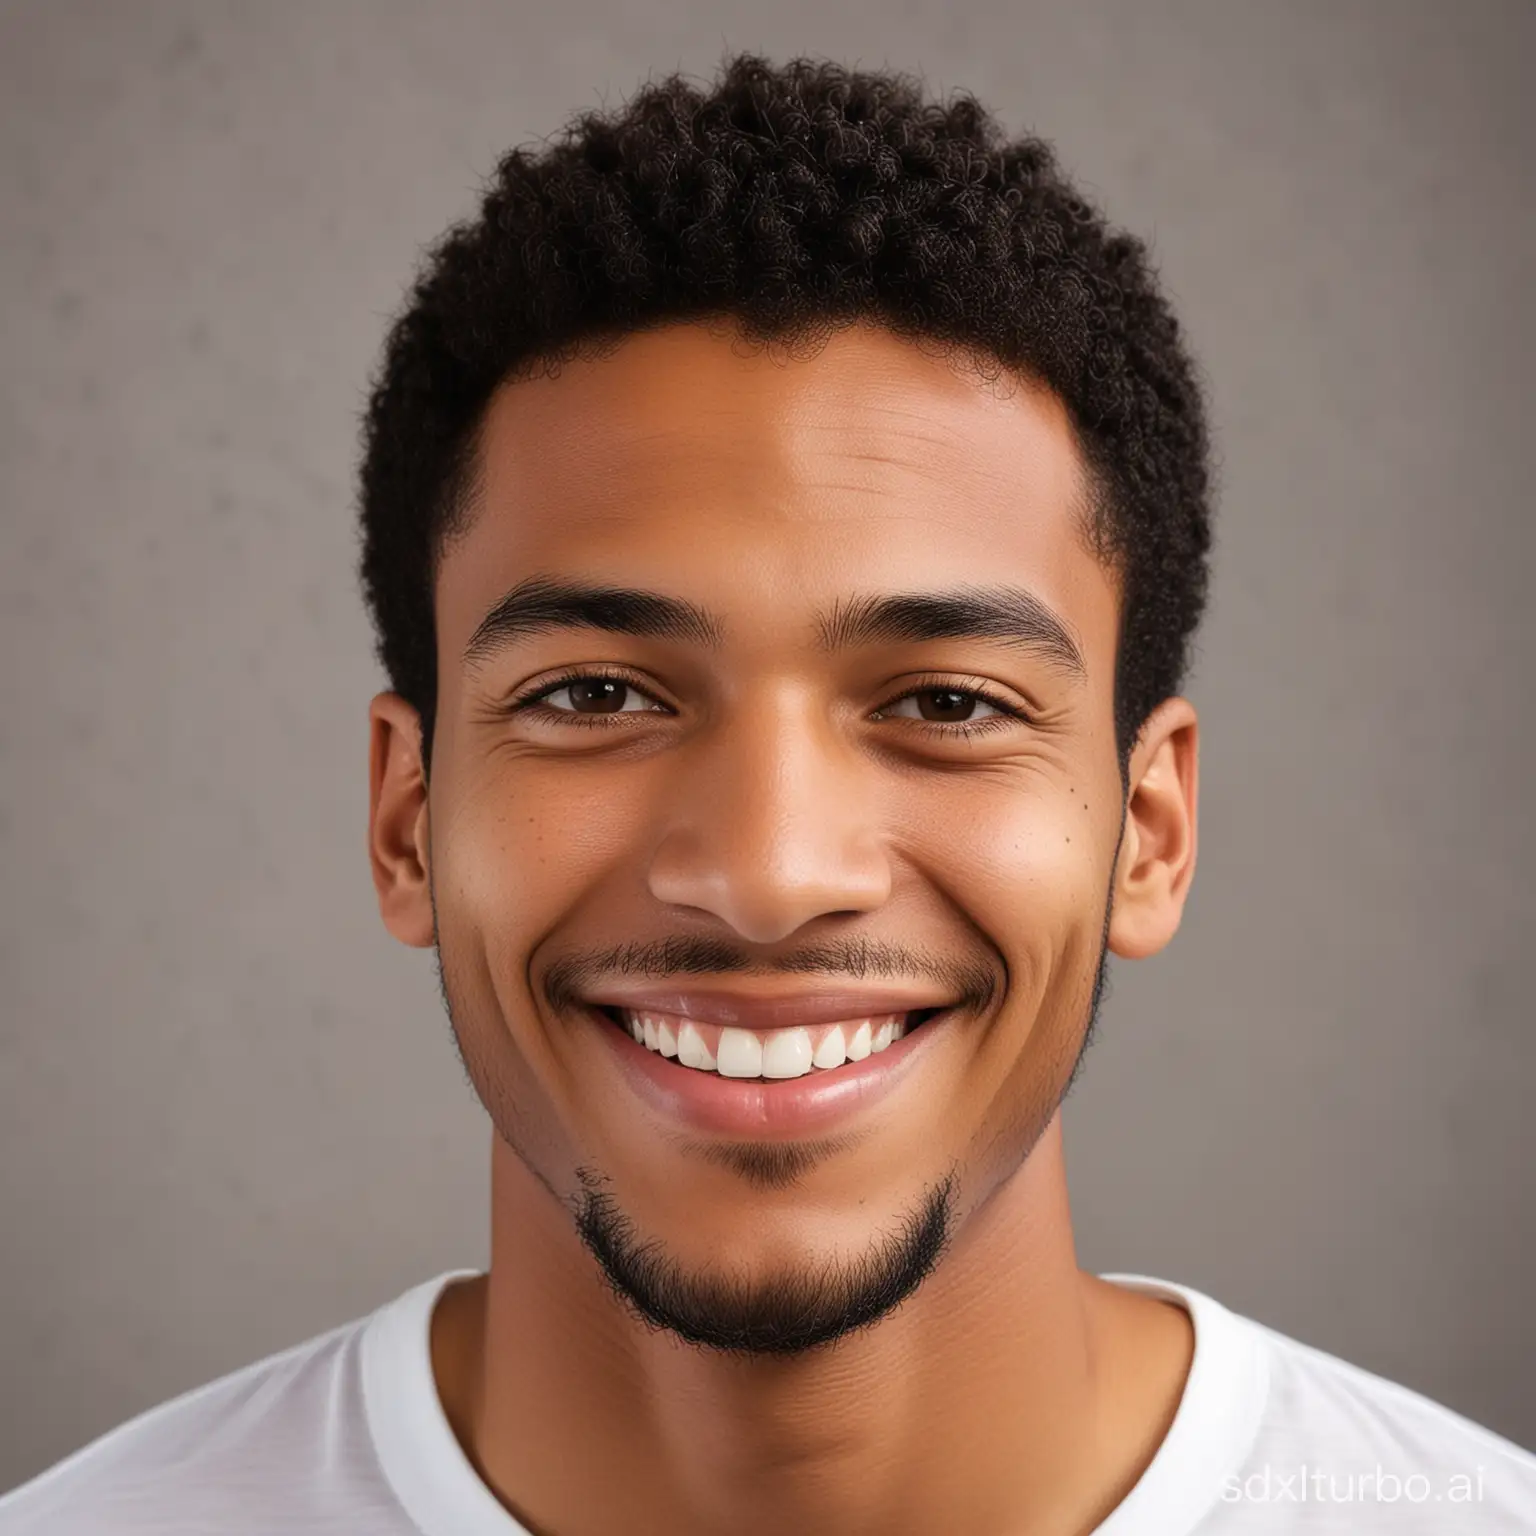 A face picture of a mixed raced male of Jamaican and British decent smiling in a friendly manner.